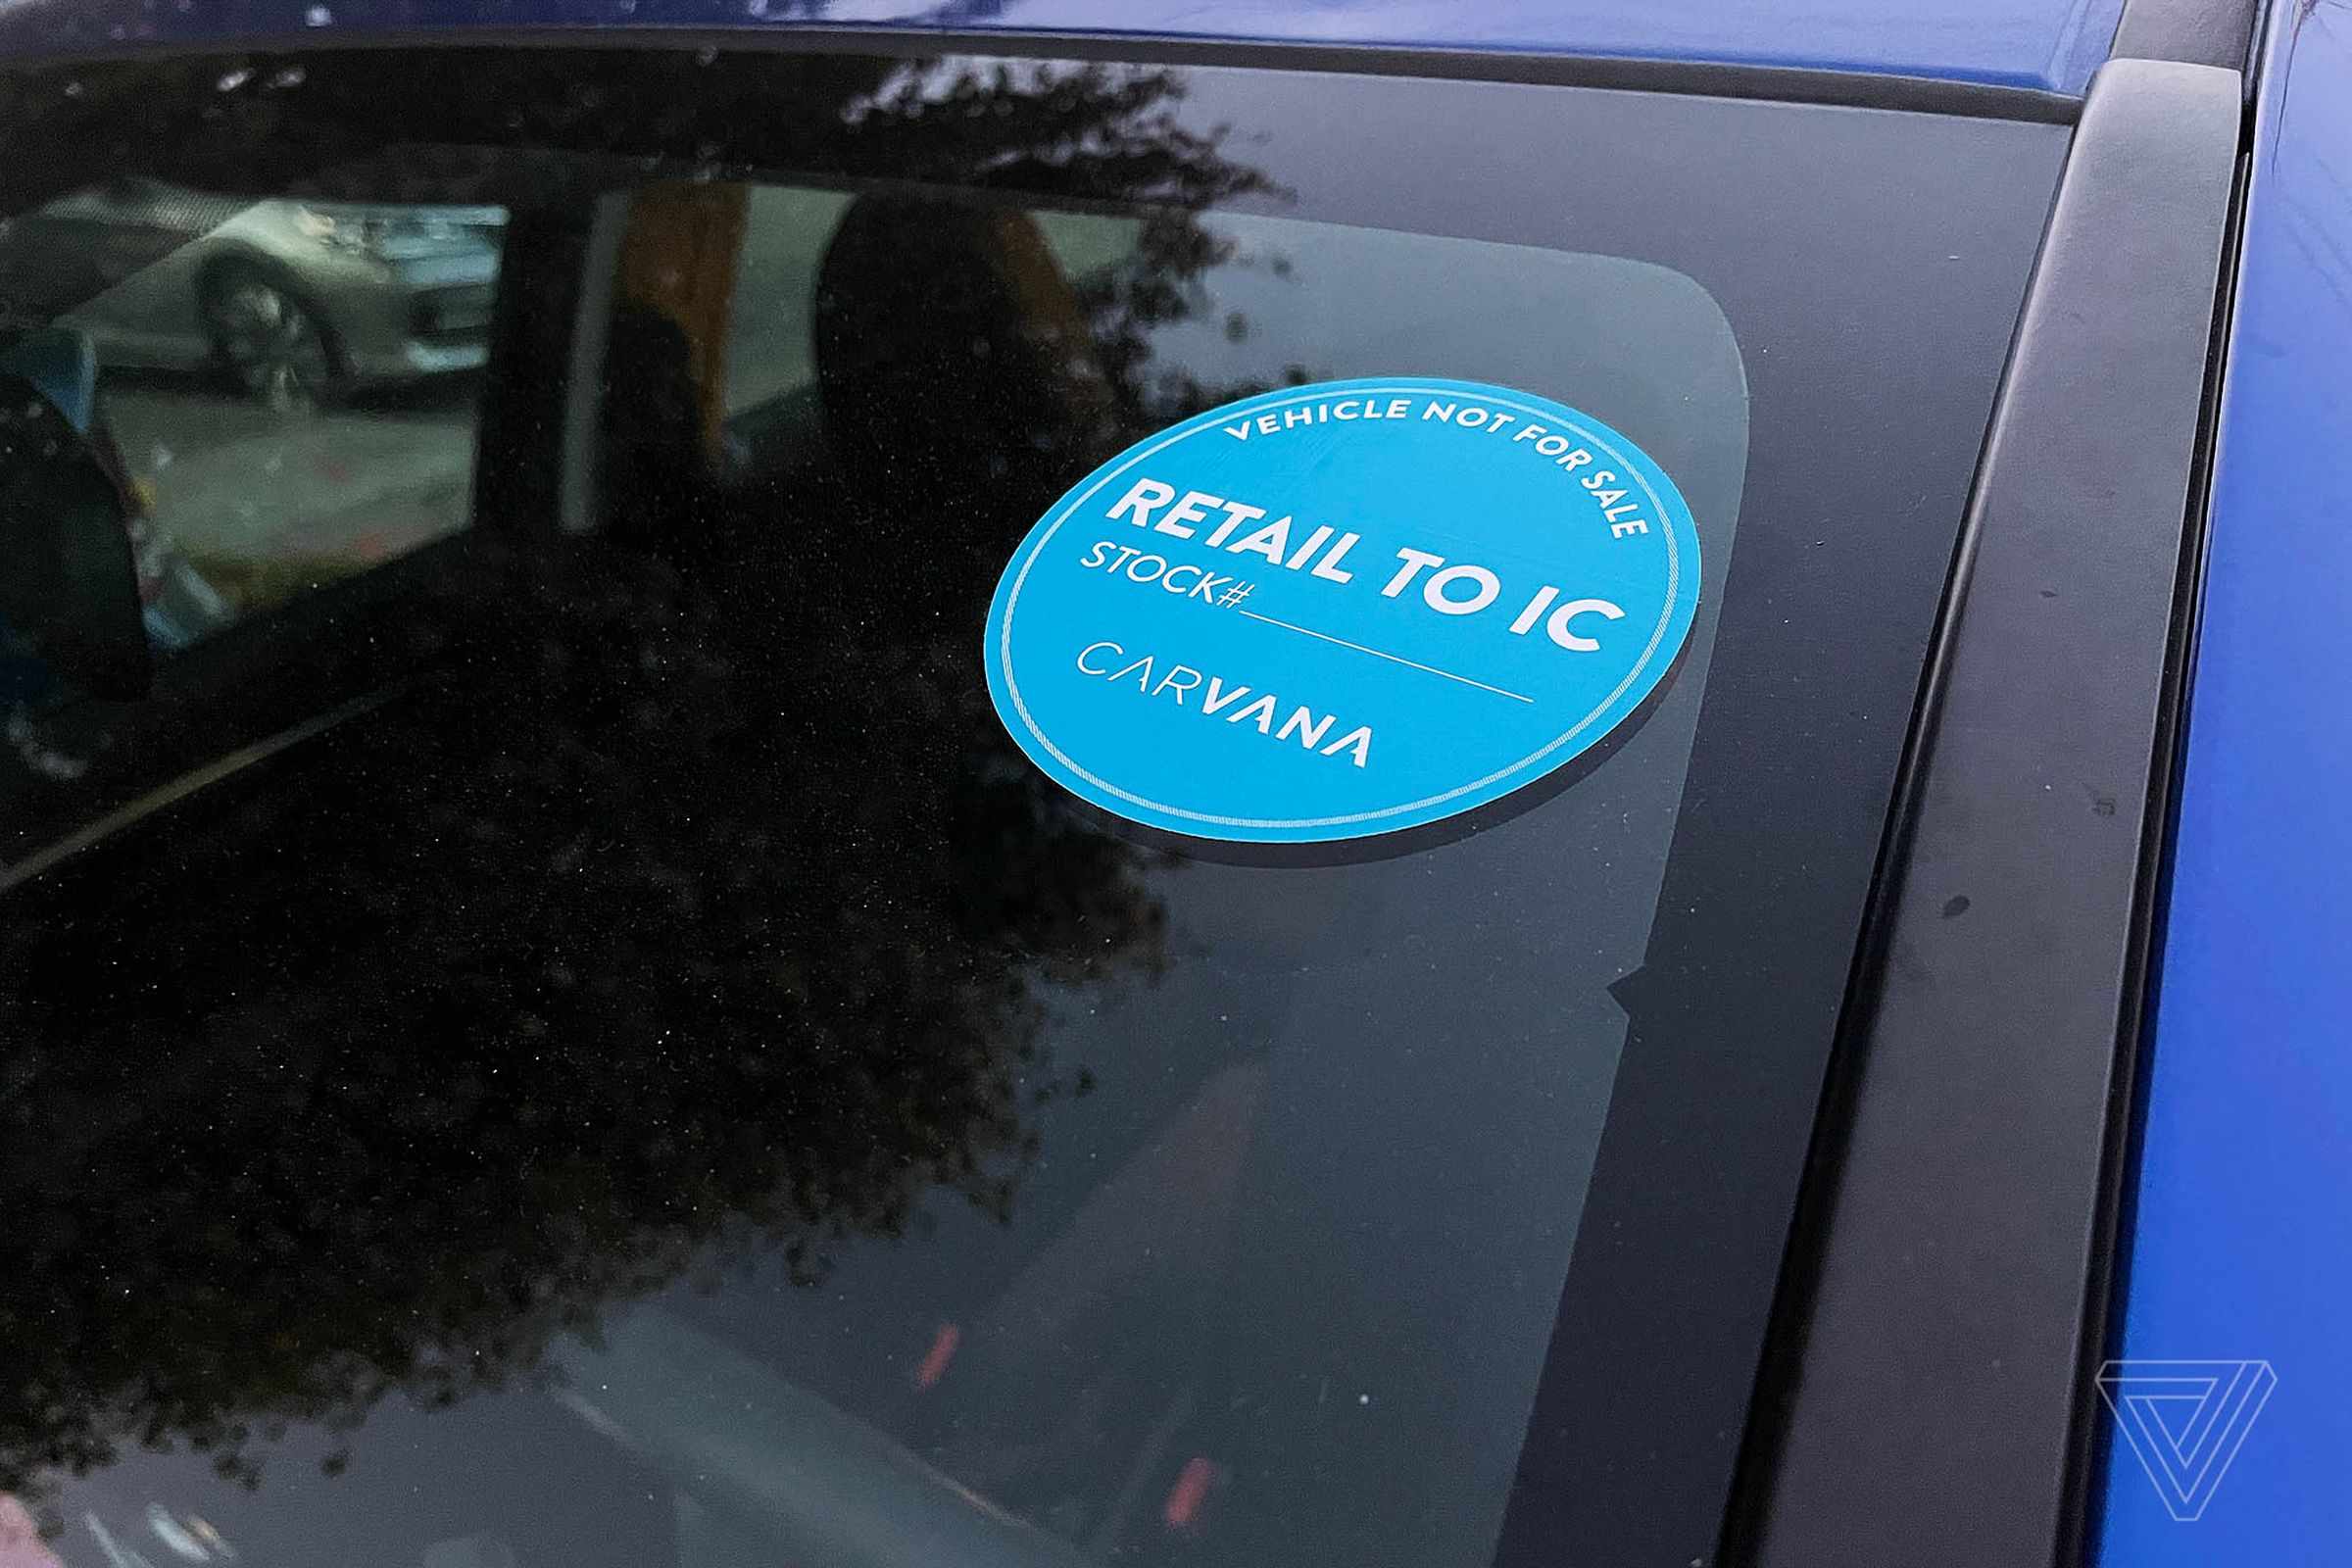 The Carvana sticker reads RETAIL TO IC and VEHICLE NOT FOR SALE